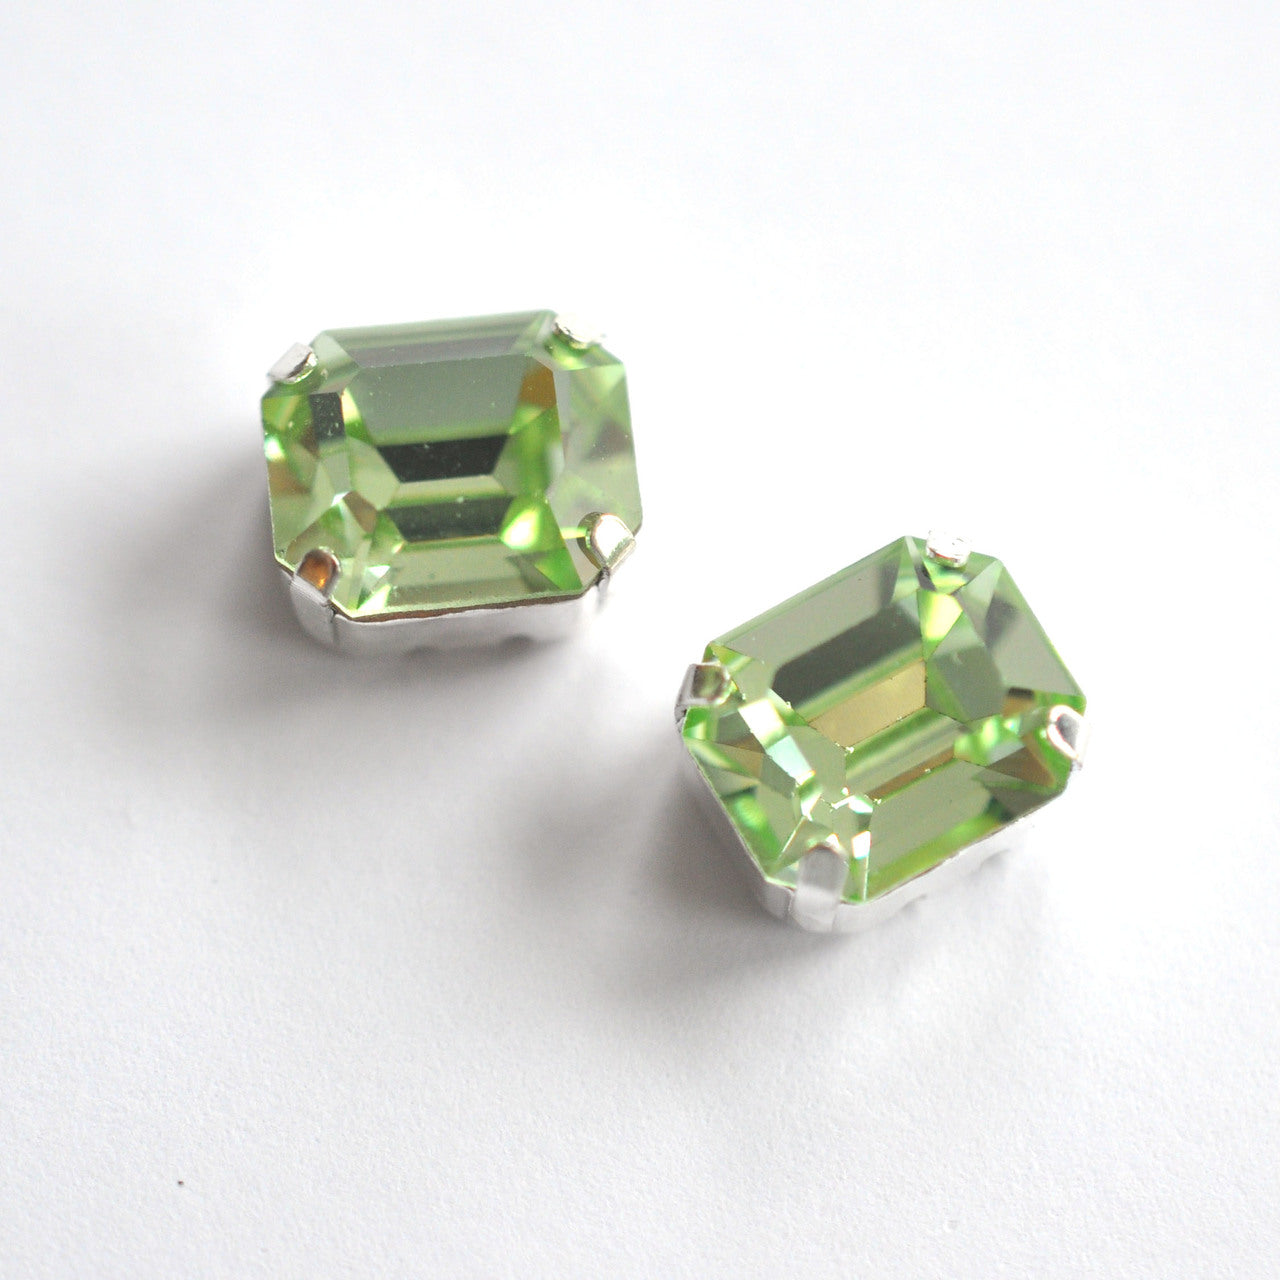 Chrysolite 12x10mm Octagon Sew On Crystals - 2 Pieces